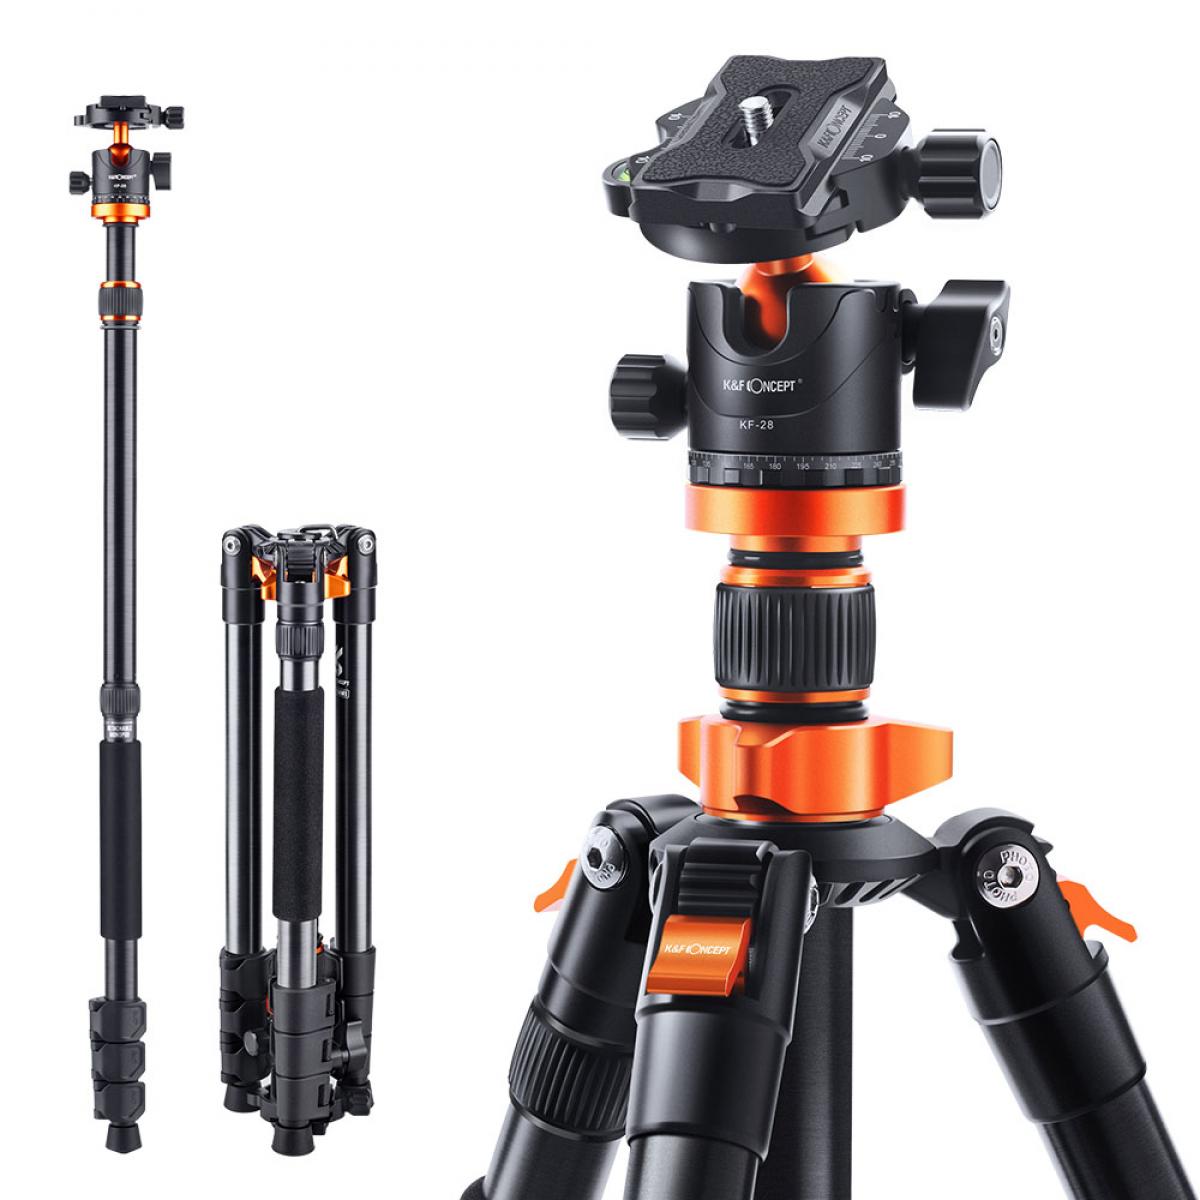 62''/1.6m Aluminum Tripod Detachable Monopod with Quick Release Plate, Ball Head and Compact Travel Carrying Bag SA254M1 for DSLR K254A1+BH-28L (SA254M1)